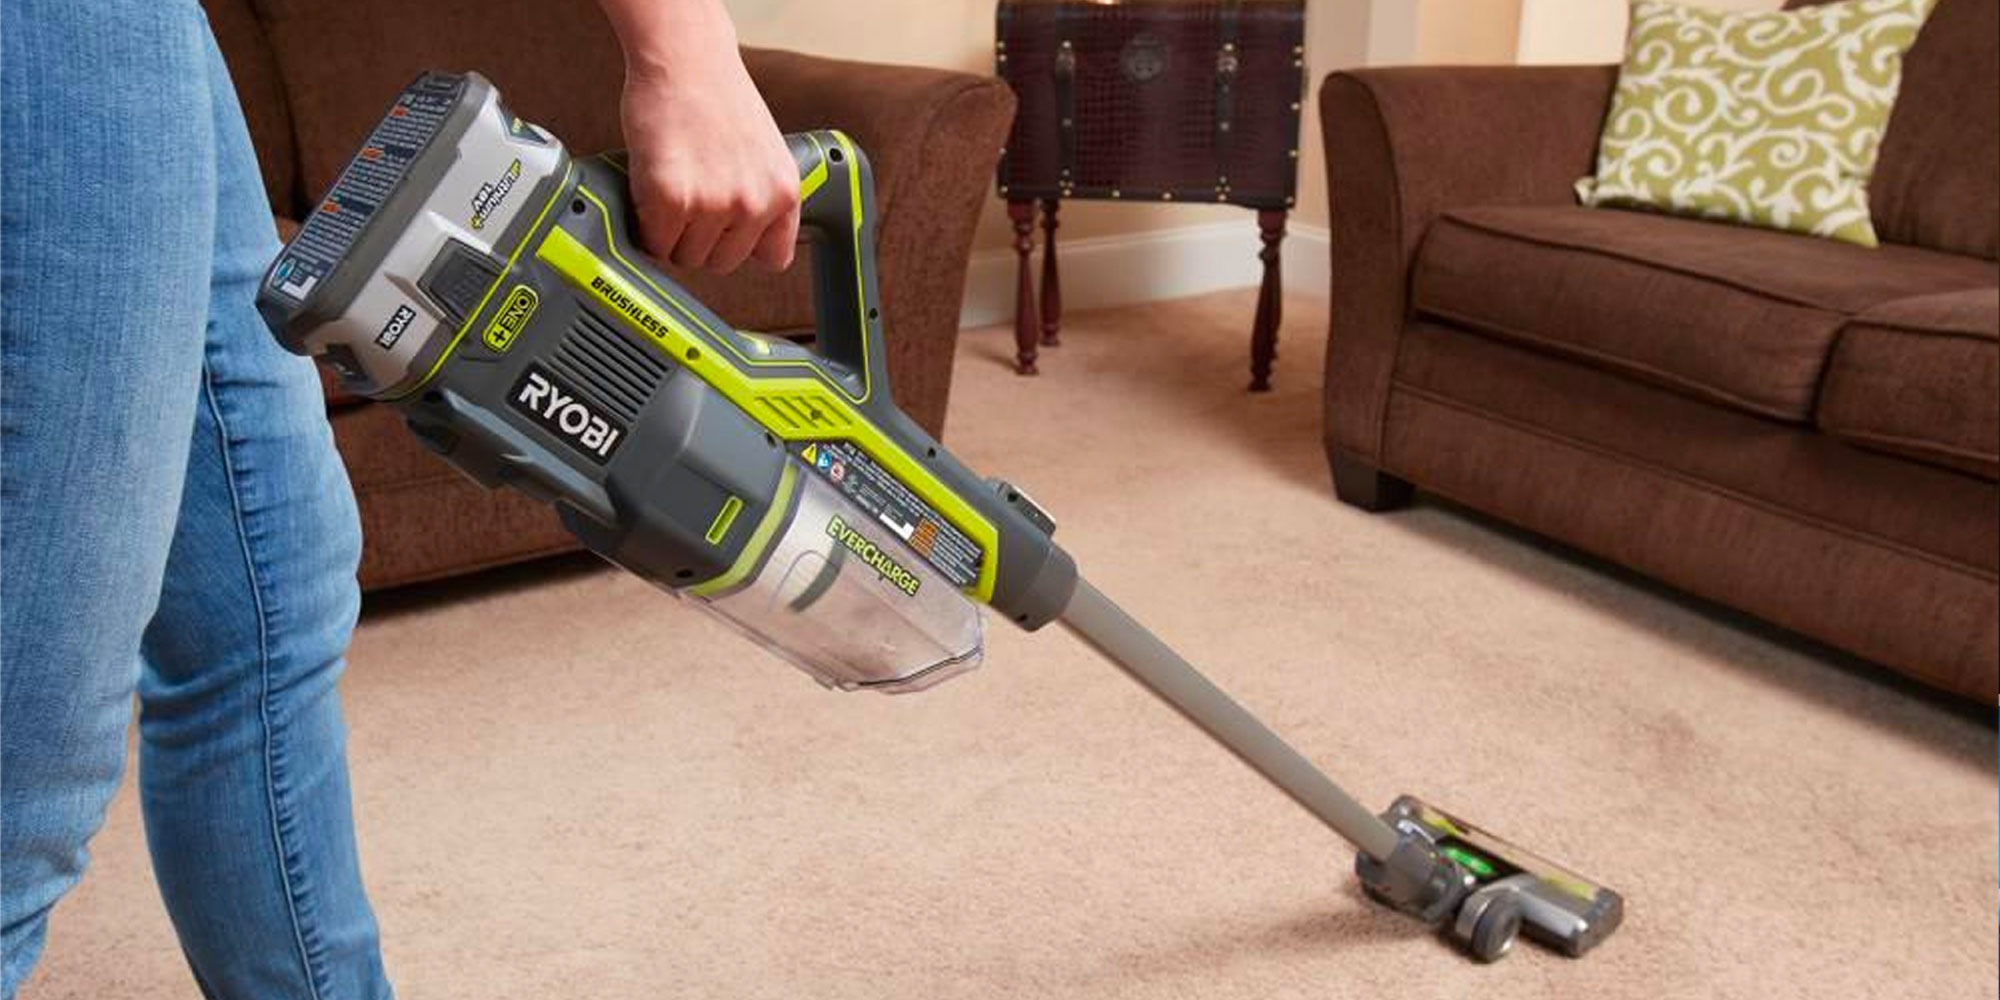 Clean up any mess w/ RYOBI's ONE+ cordless stick vacuum at $129 (Reg. $160+) - 9to5Toys